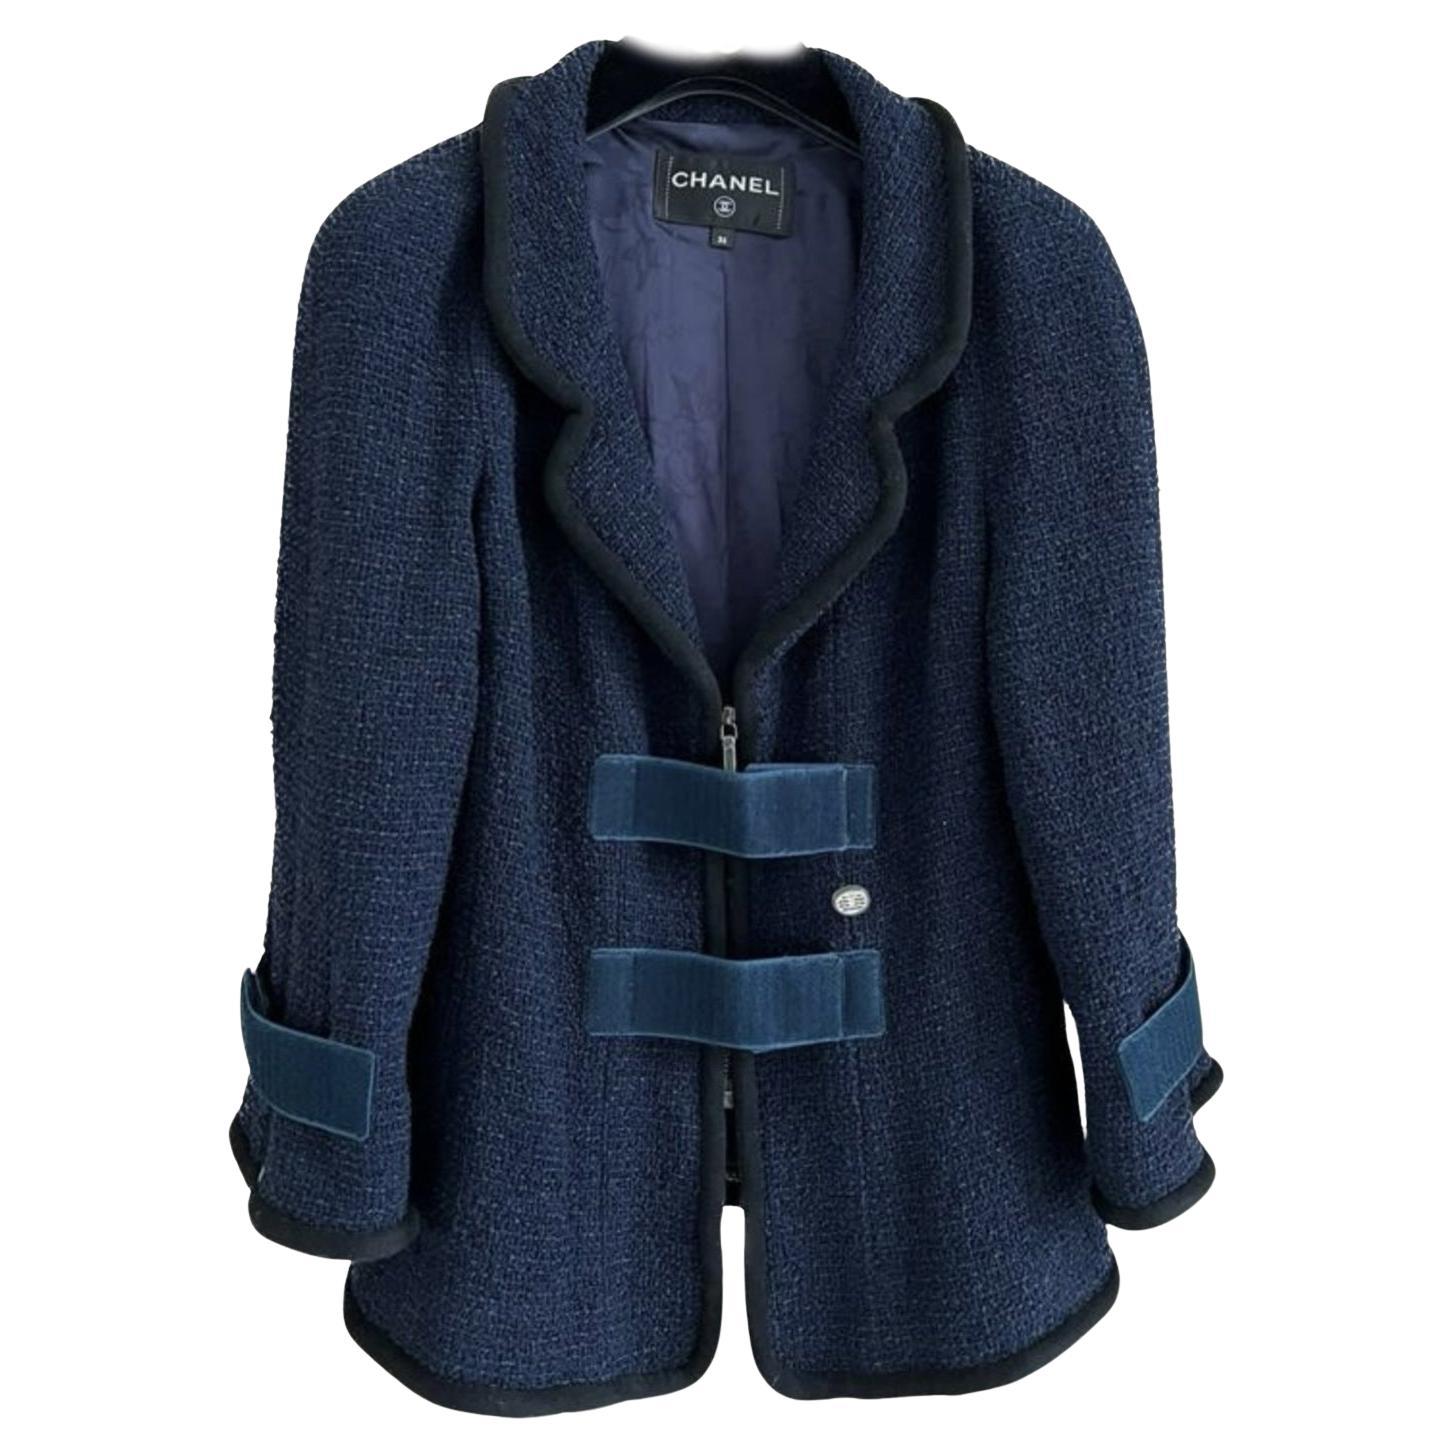 Chanel Navy Tweed Velcro Accents Jacket For Sale